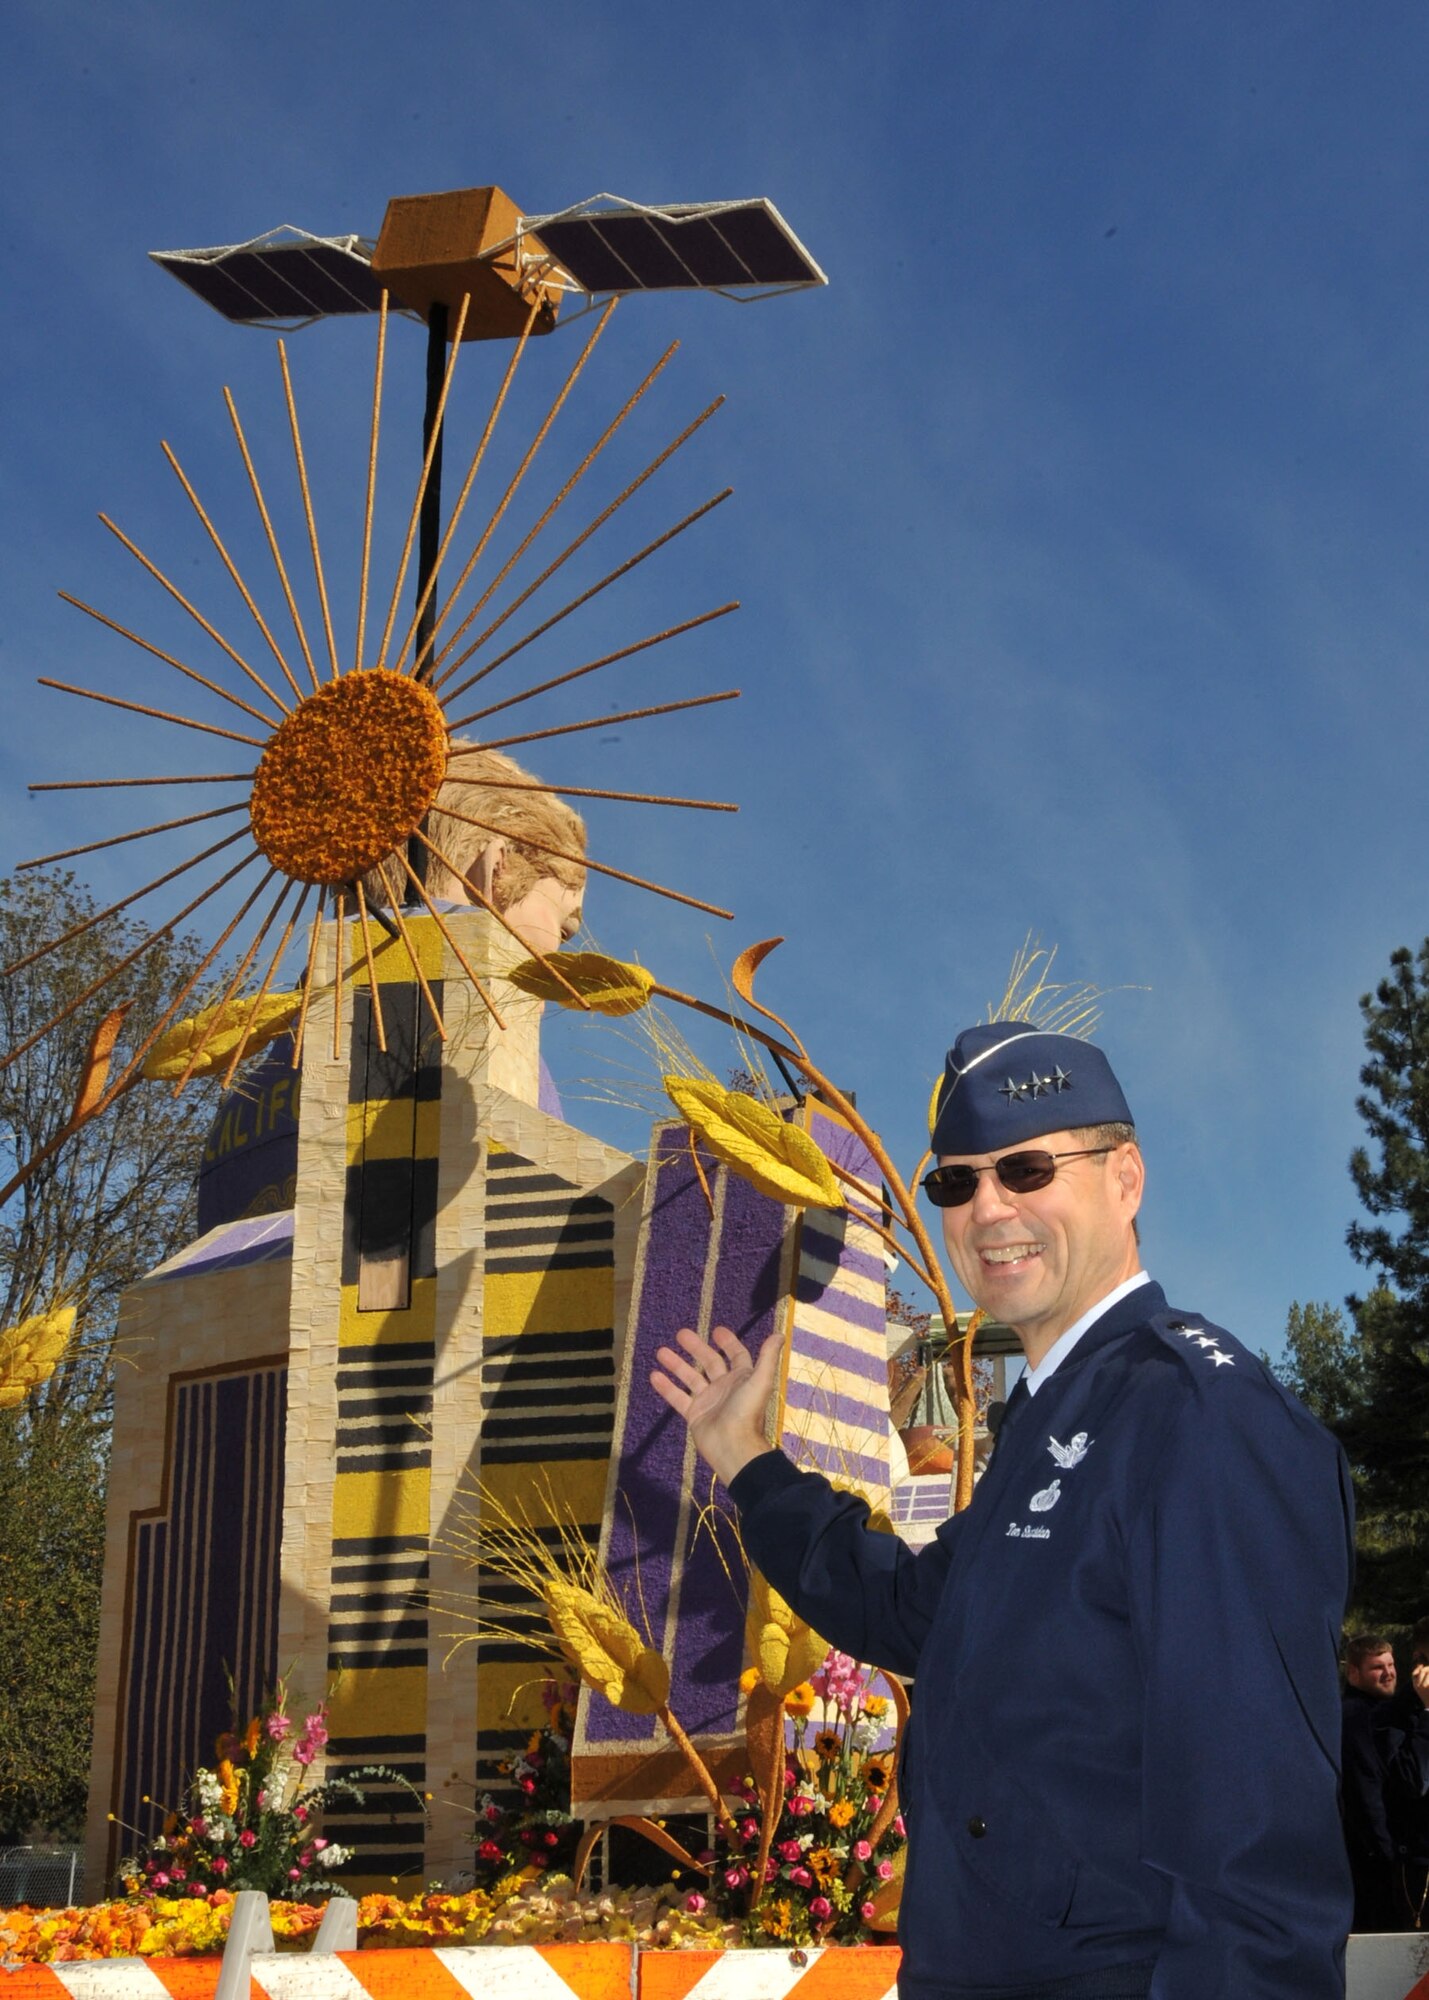 Lt. Gen. Tom Sheridan, Space and Missile Systems Center commander, checks out a Rose Parade float topped by a GPS satellite model, Dec. 31. All floats in the parade are covered with flowers, seeds and other plant materials. It takes hundreds of volunteer man-hours to decorate the floats.   (Photo by Lou Hernandez)